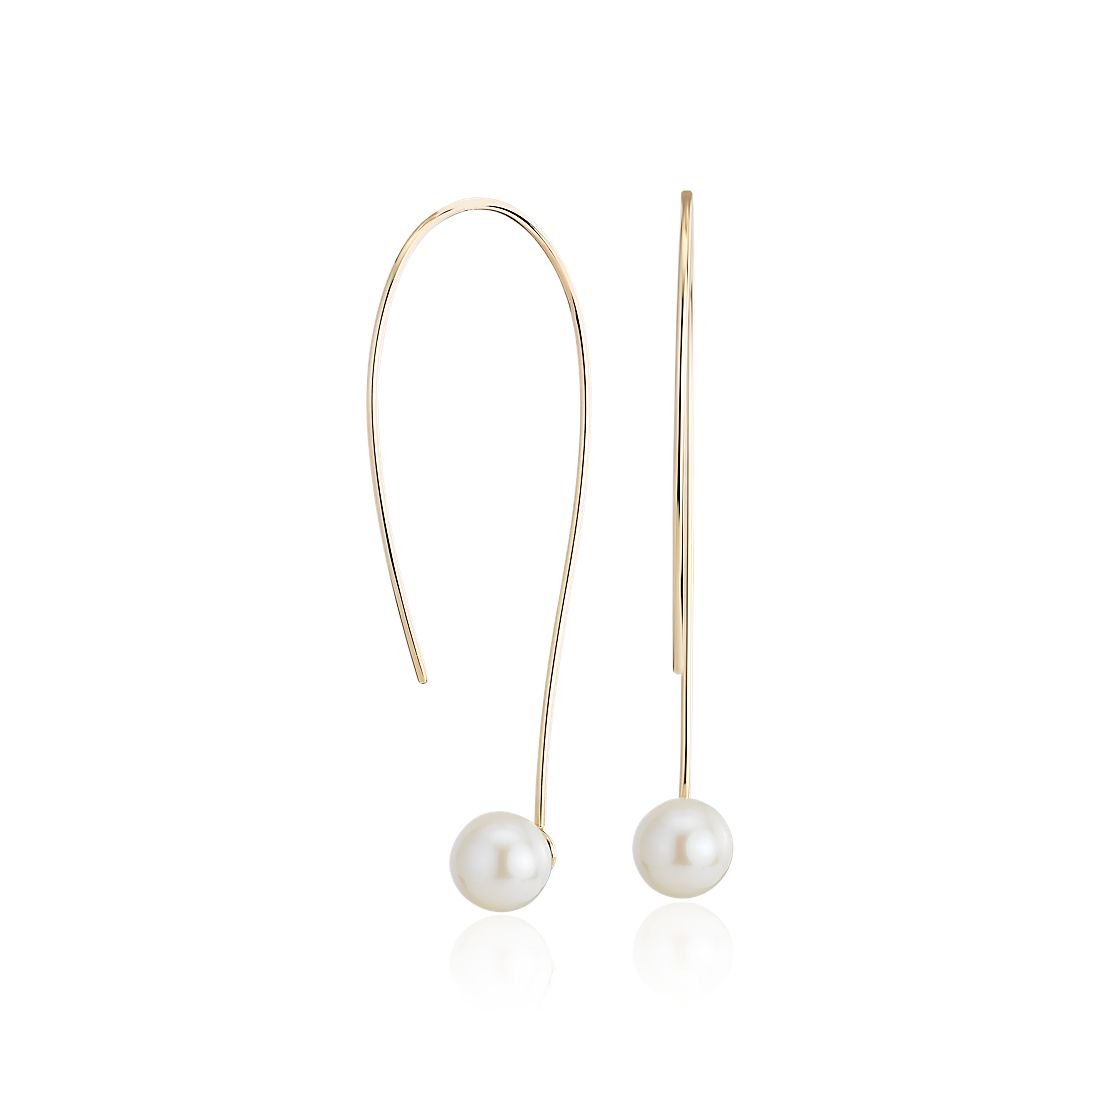 Front-Back Freshwater Cultured Pearl Threader Earring in 14k Yellow Gold (5-6mm)